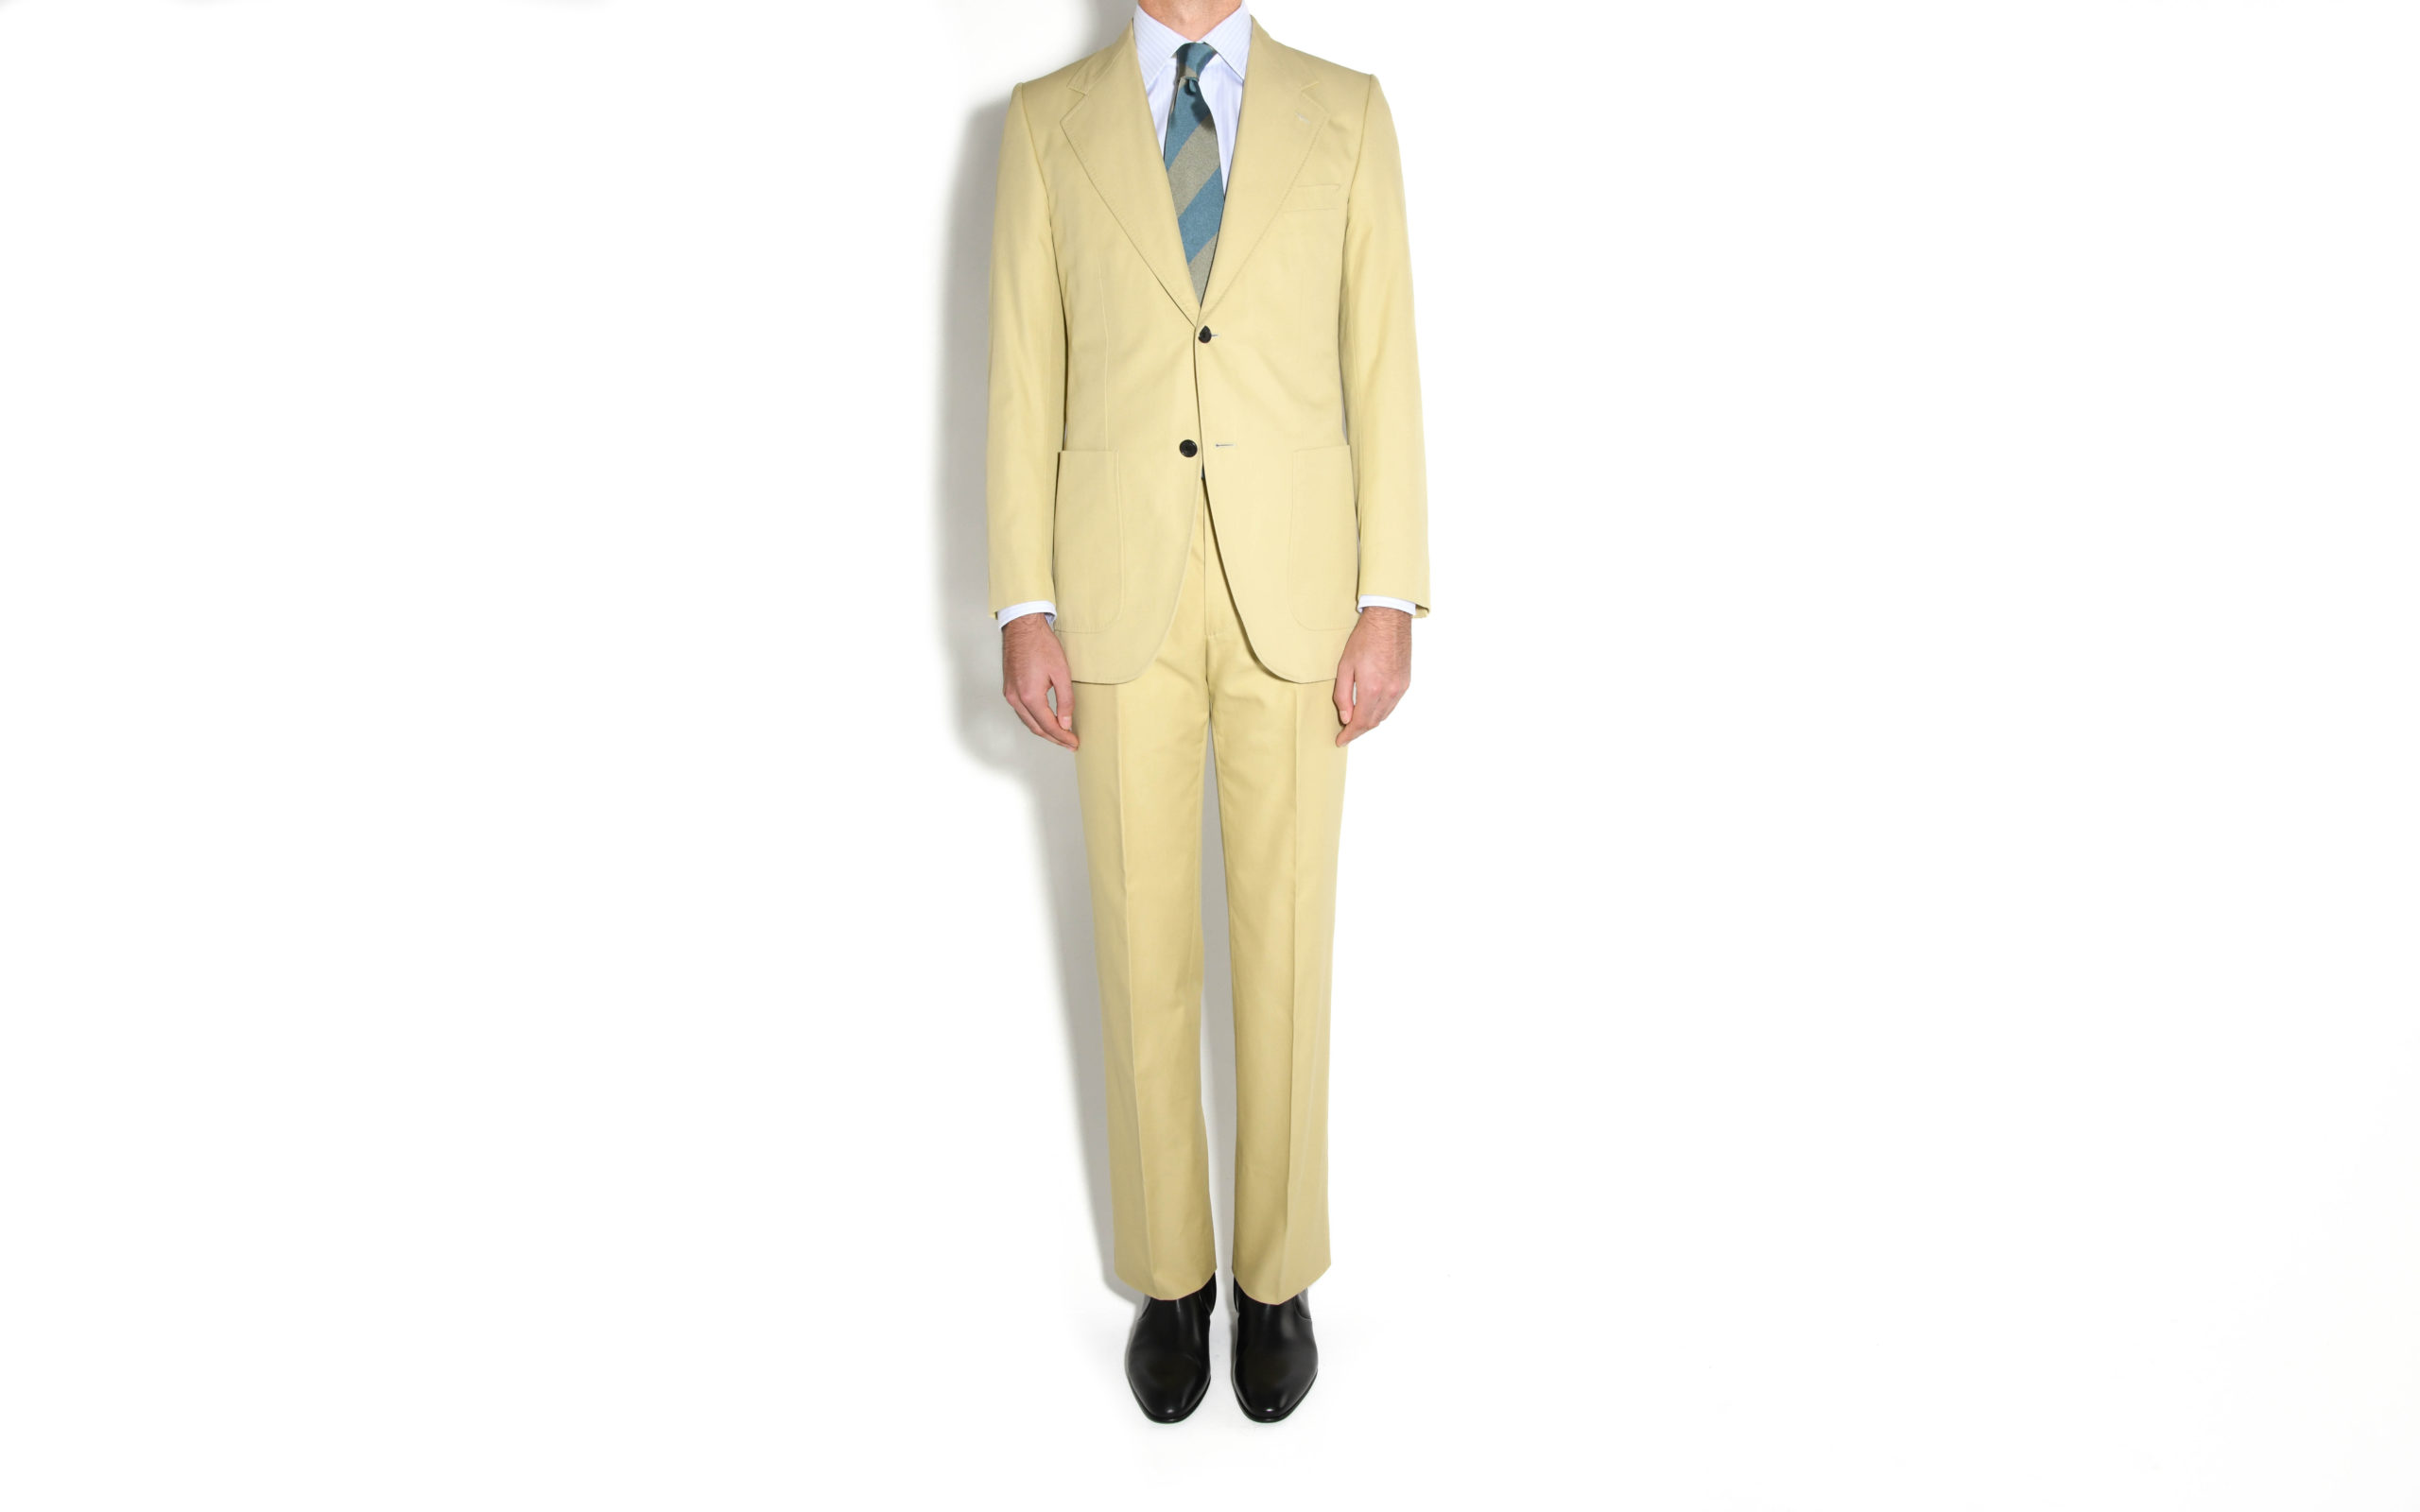 Ladies Gabardine Suit in Sable - The Ben Silver Collection